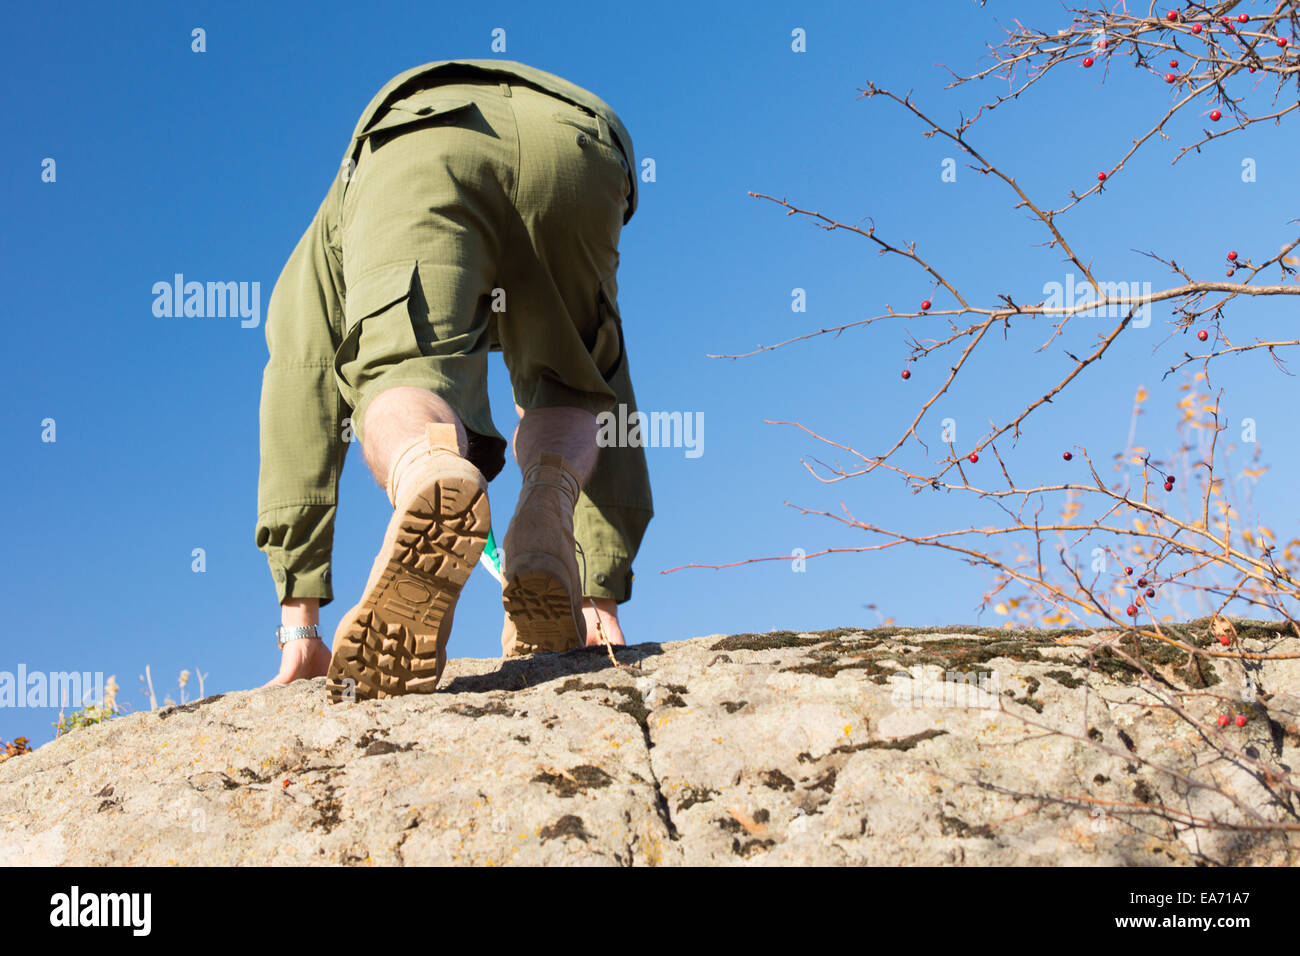 Rear View of White Boy Scout in Uniform Climbing a Big Rock on A Sunny Climate. Captured with Light Blue Sky Background. Stock Photo